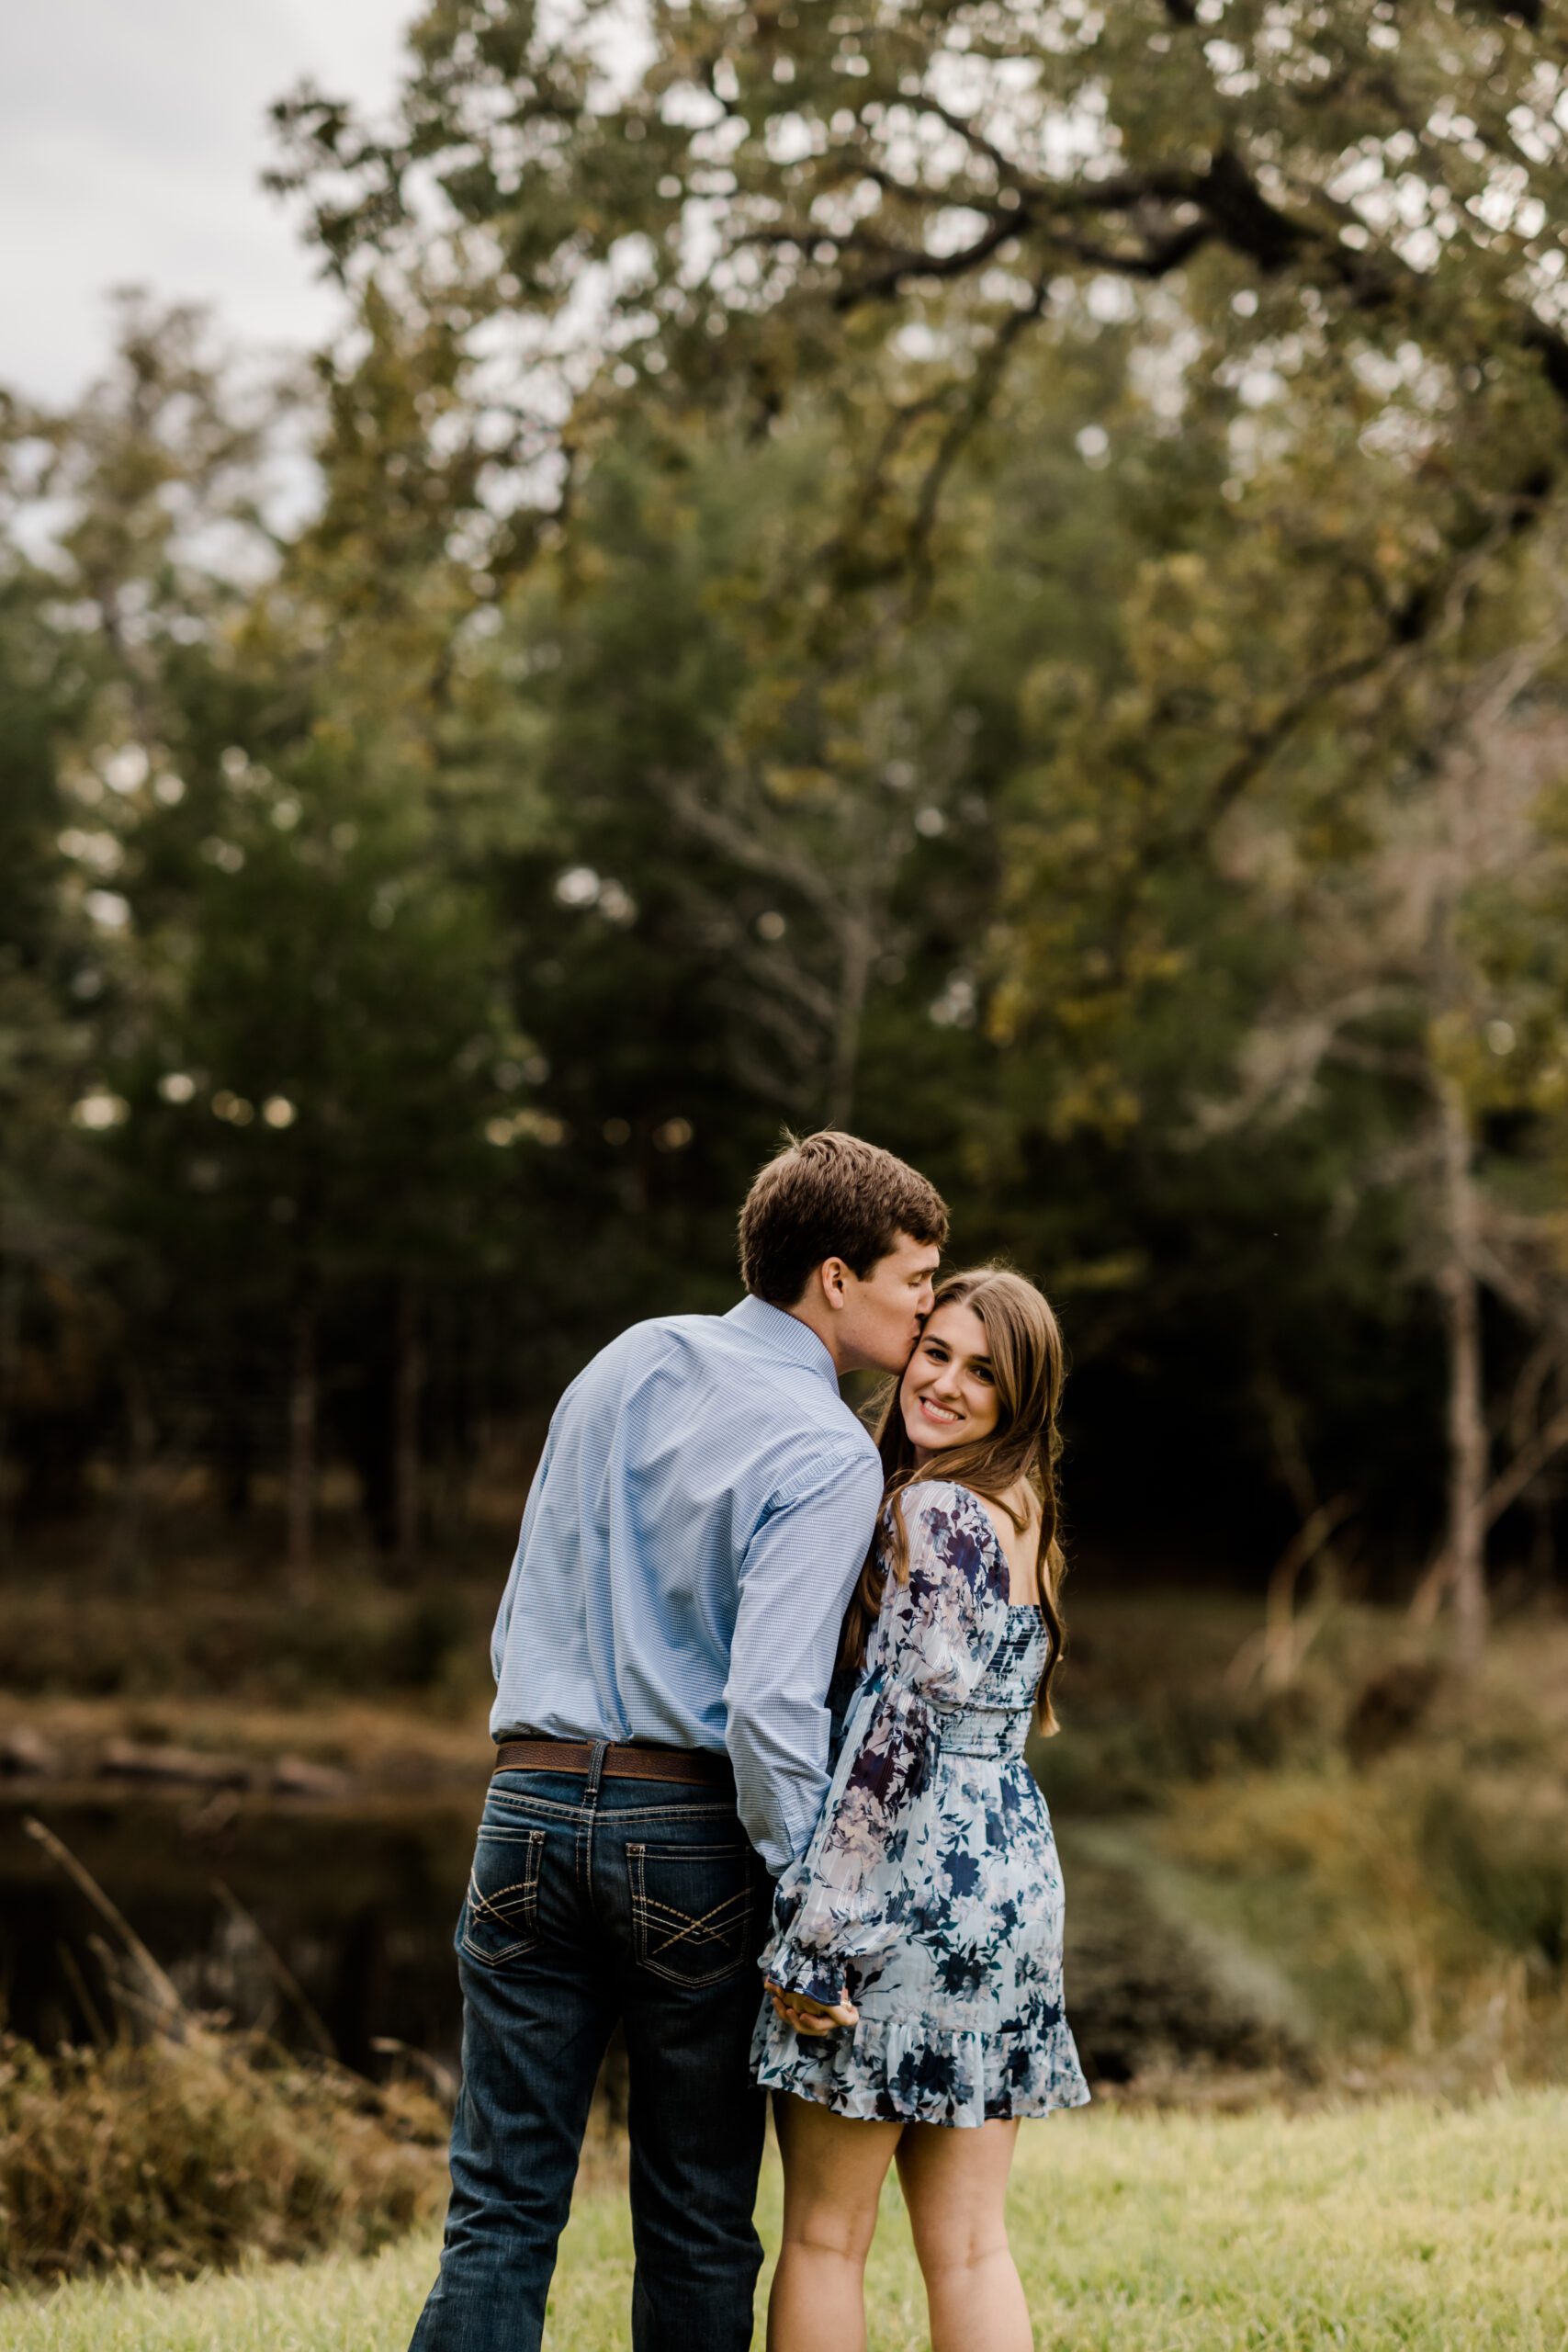 Cassie & Tanner's Engagement Session in Bryan, Texas